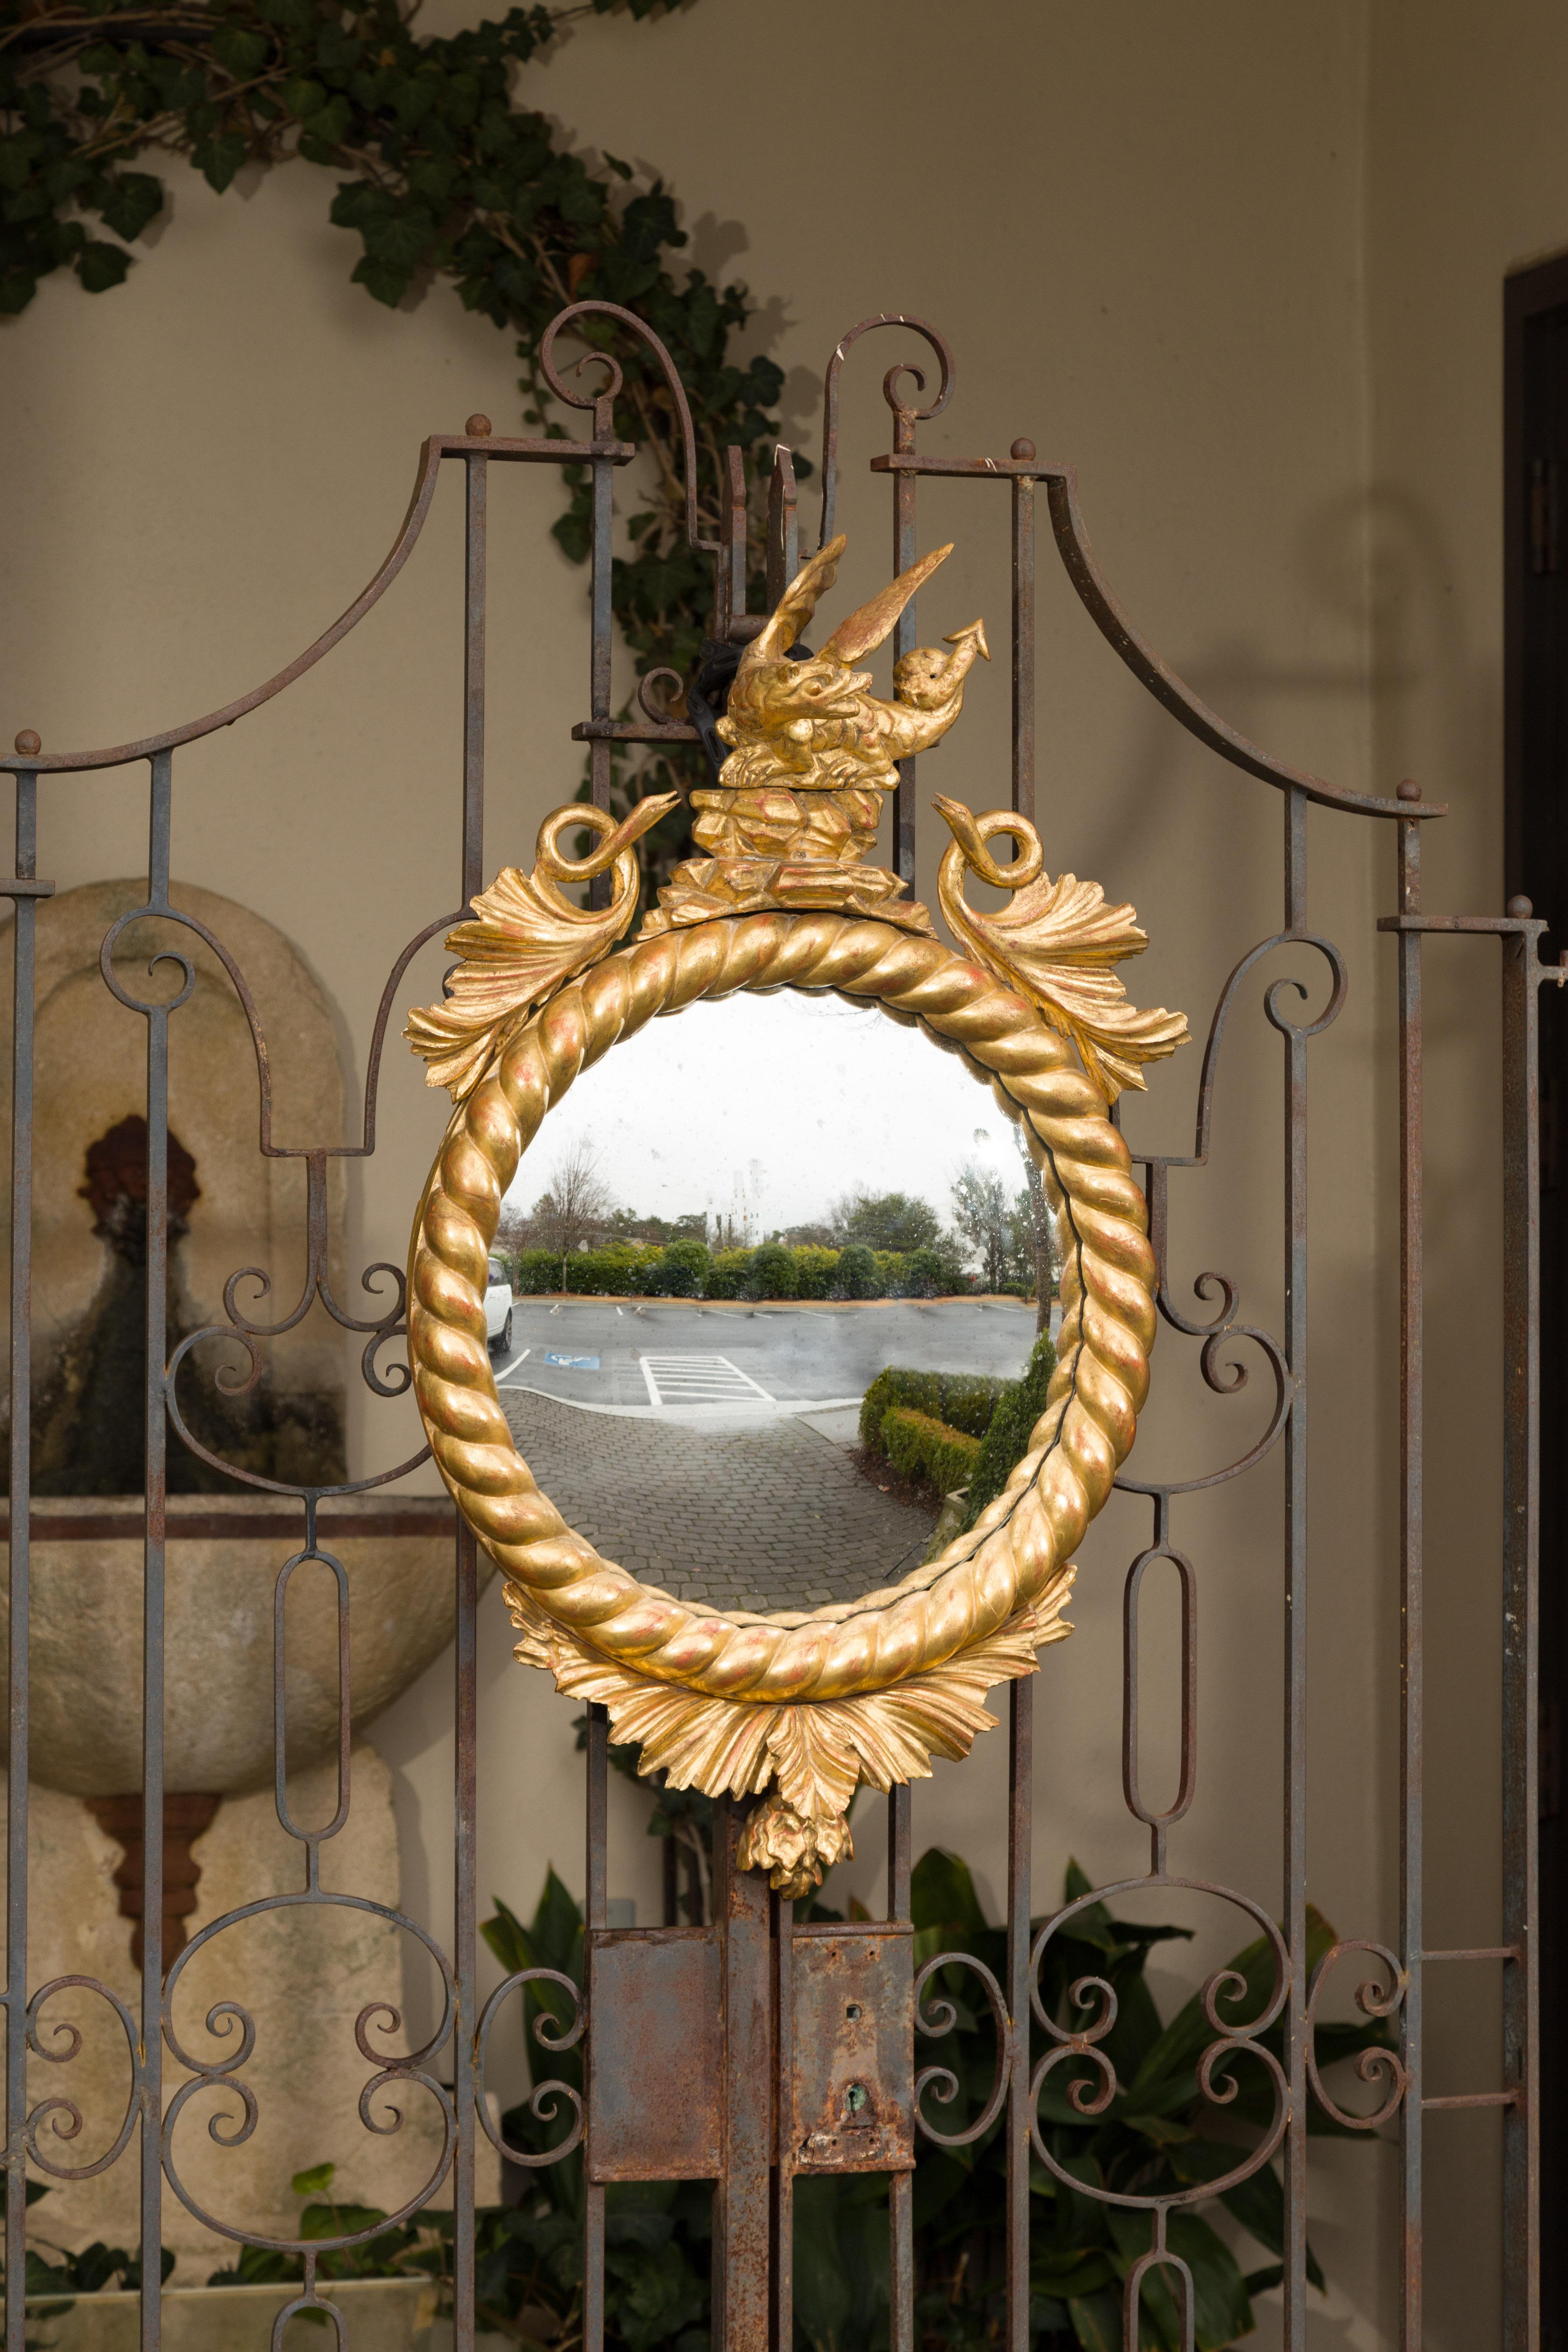 An English carved giltwood convex mirror from the 19th century, with mythical creatures and twisted frame. Born in England during the second quarter of the 19th century, this giltwood mirror captures our attention with its carved crest topped with a